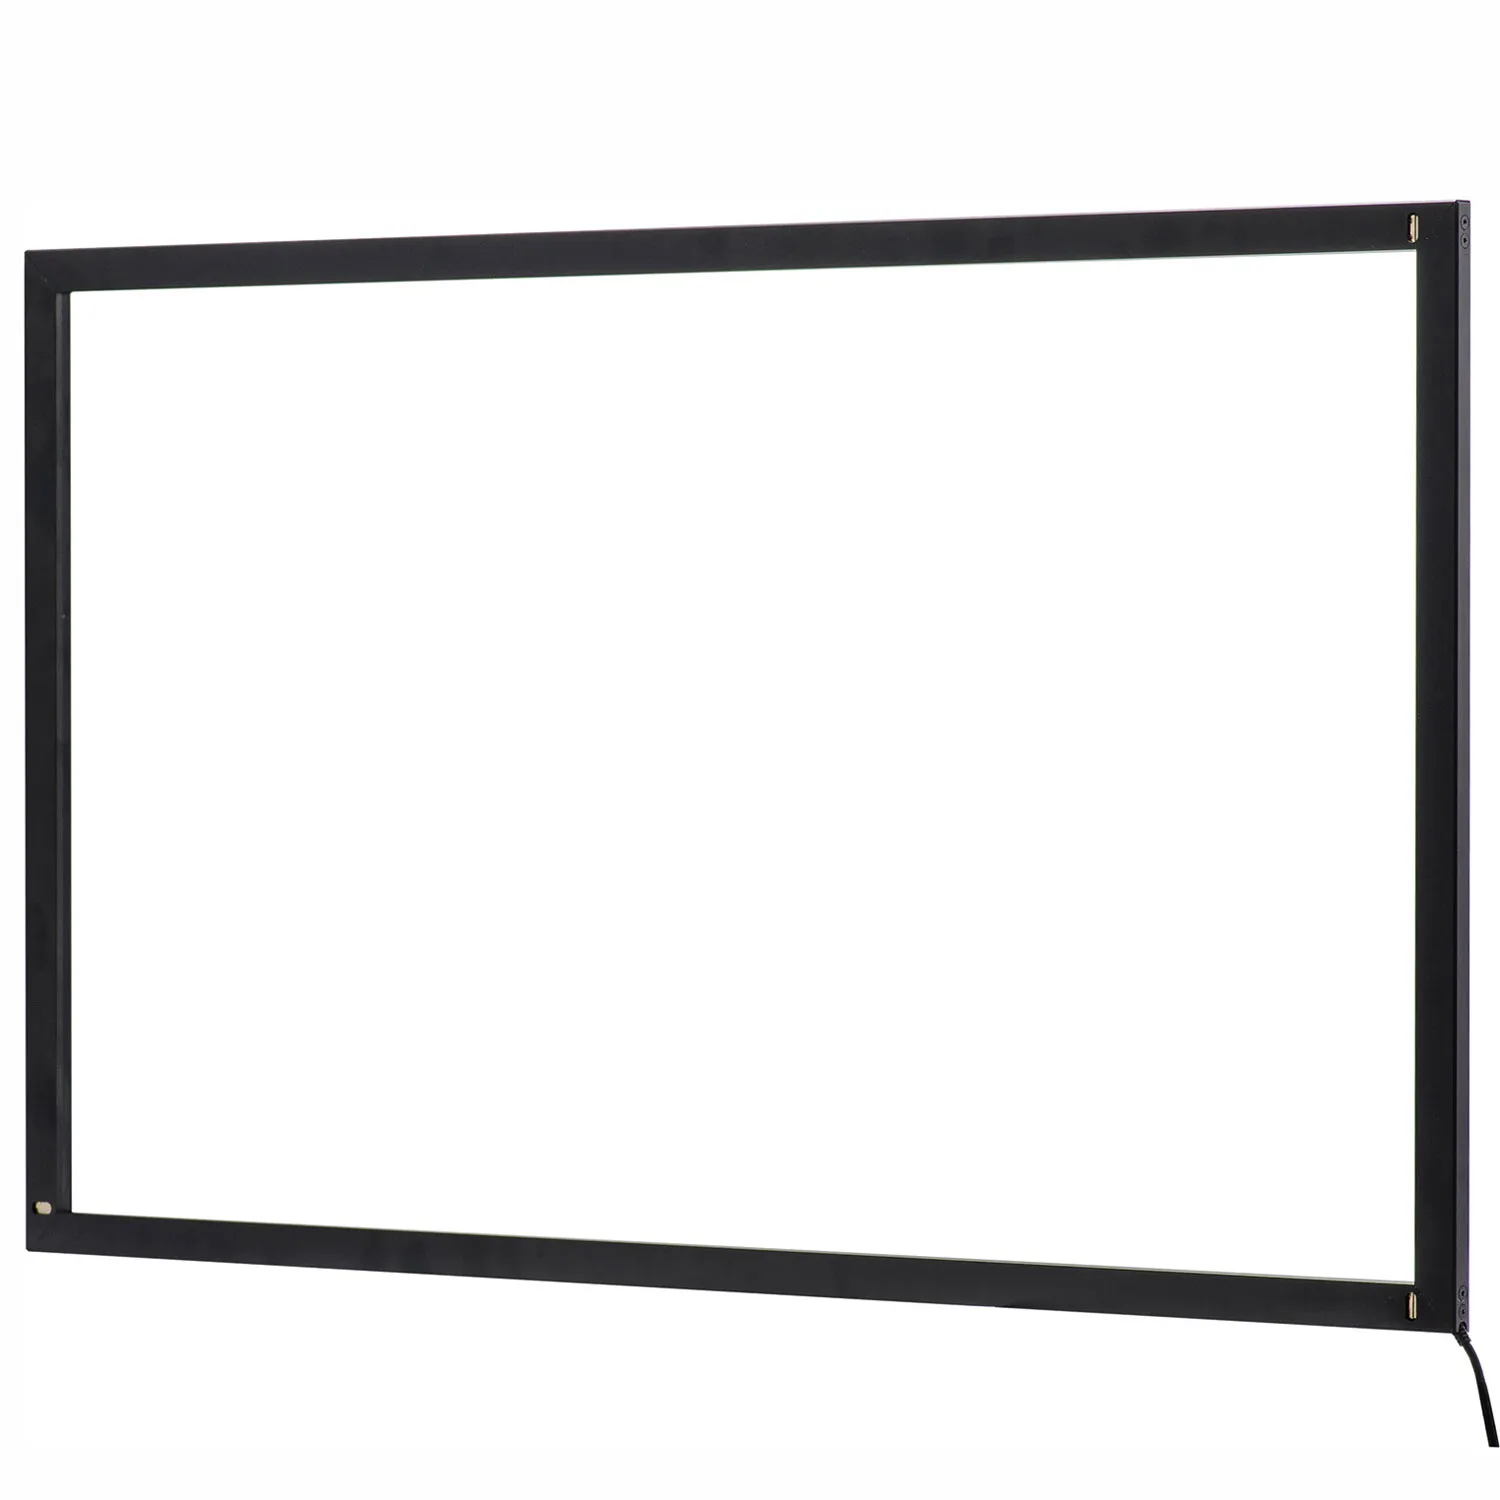 Touch frame Keetouch GmbH 70" KP-700-IP2S0U1